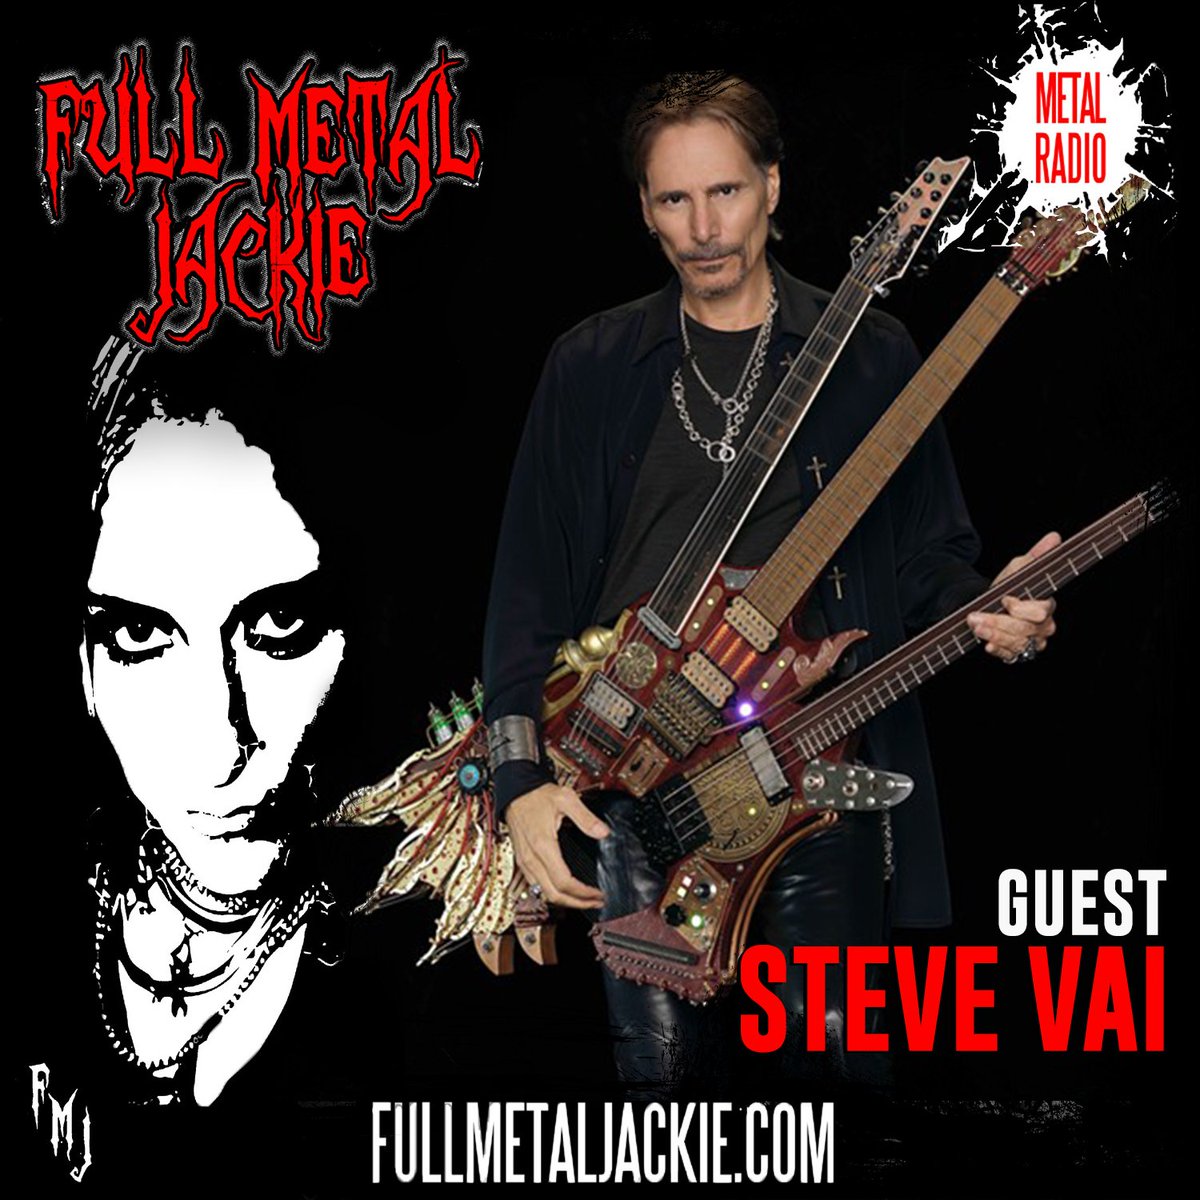 Steve Vai is appearing on the @FullMetalJackie radio show this weekend! Find a station airing/streaming the show: bit.ly/3xA8Mer